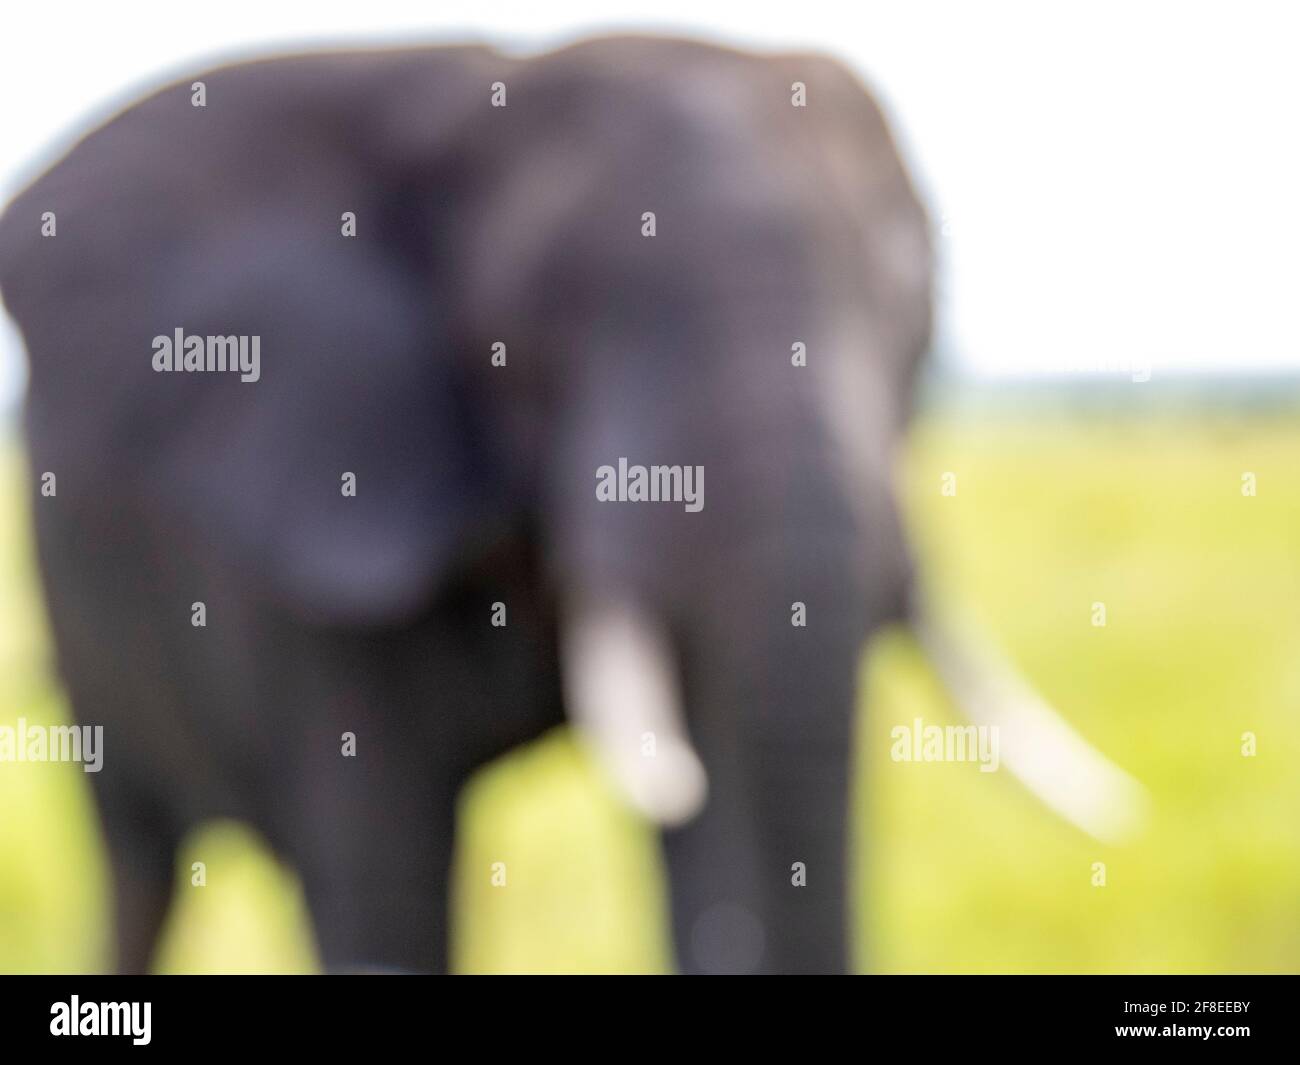 Serengeti National Park, Tanzania, Africa - February 29, 2020: African elephant out of focus in Serengeti Stock Photo